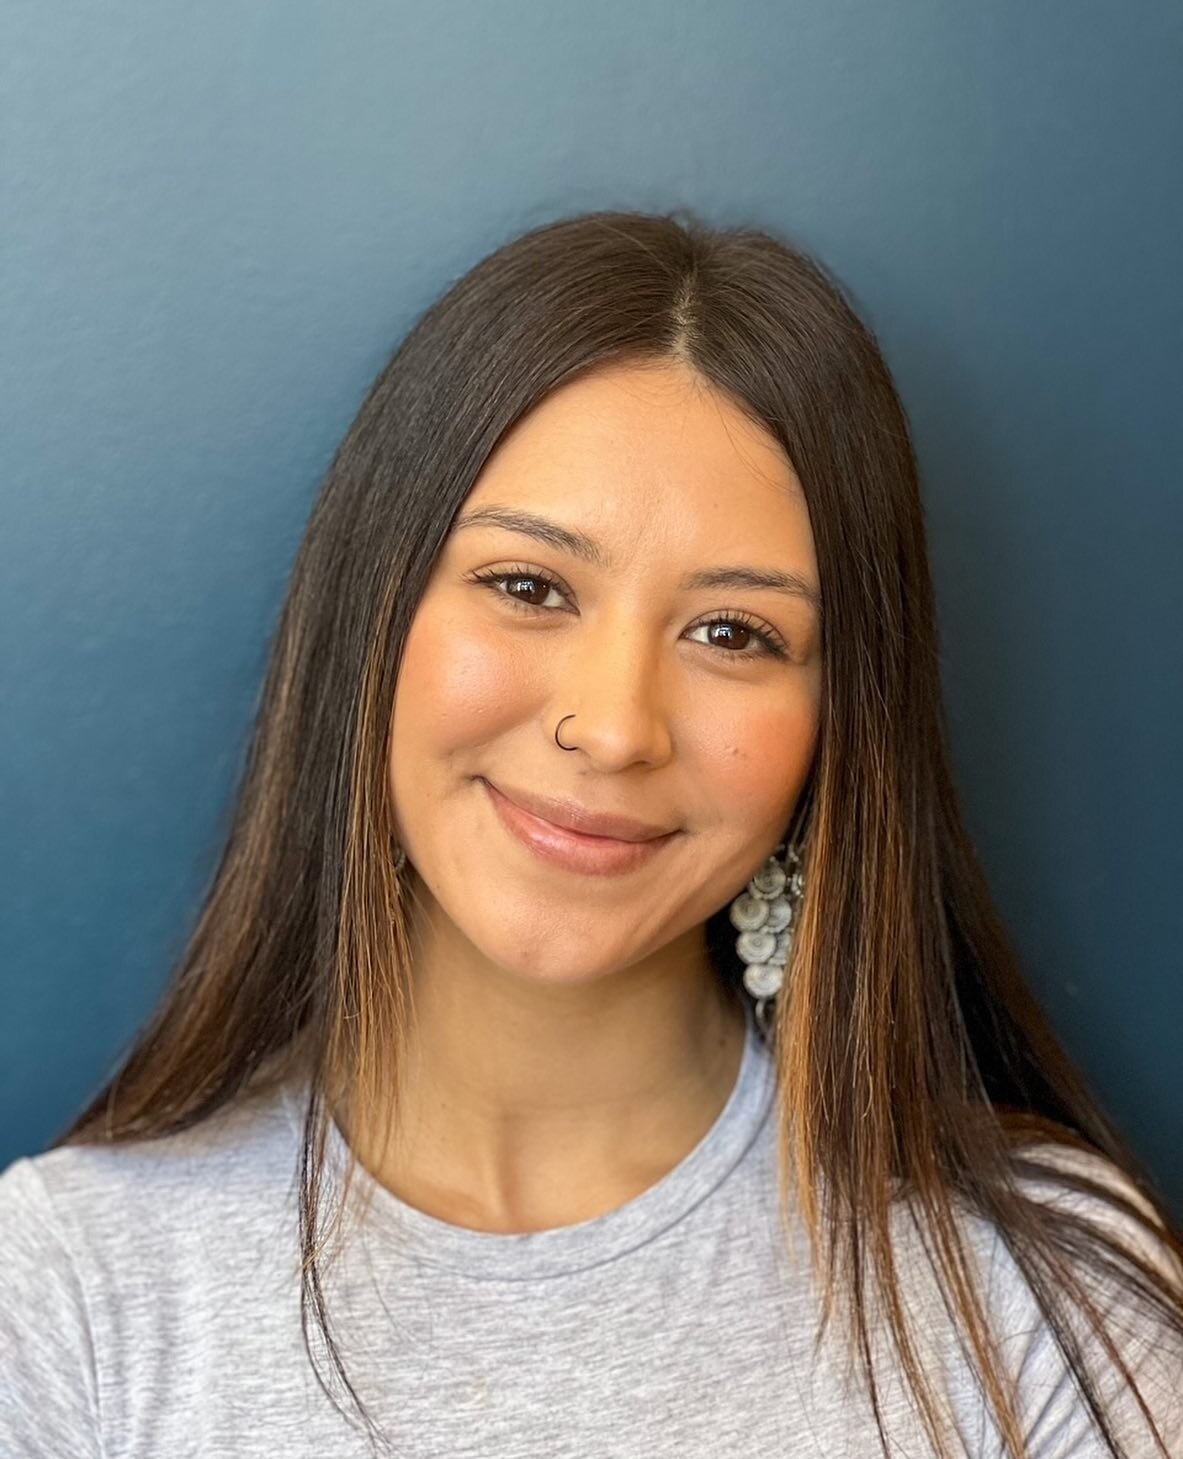 Our team is growing! We are excited to introduce one of our new talented estheticians, Marisol! ⁠⠀
⁠⠀
Some of her specialties are facial massage and deep relaxation, dermaplaning, chemical peels, full body waxing, and detailed brow shaping. ⁠⠀
⁠⠀
Tak